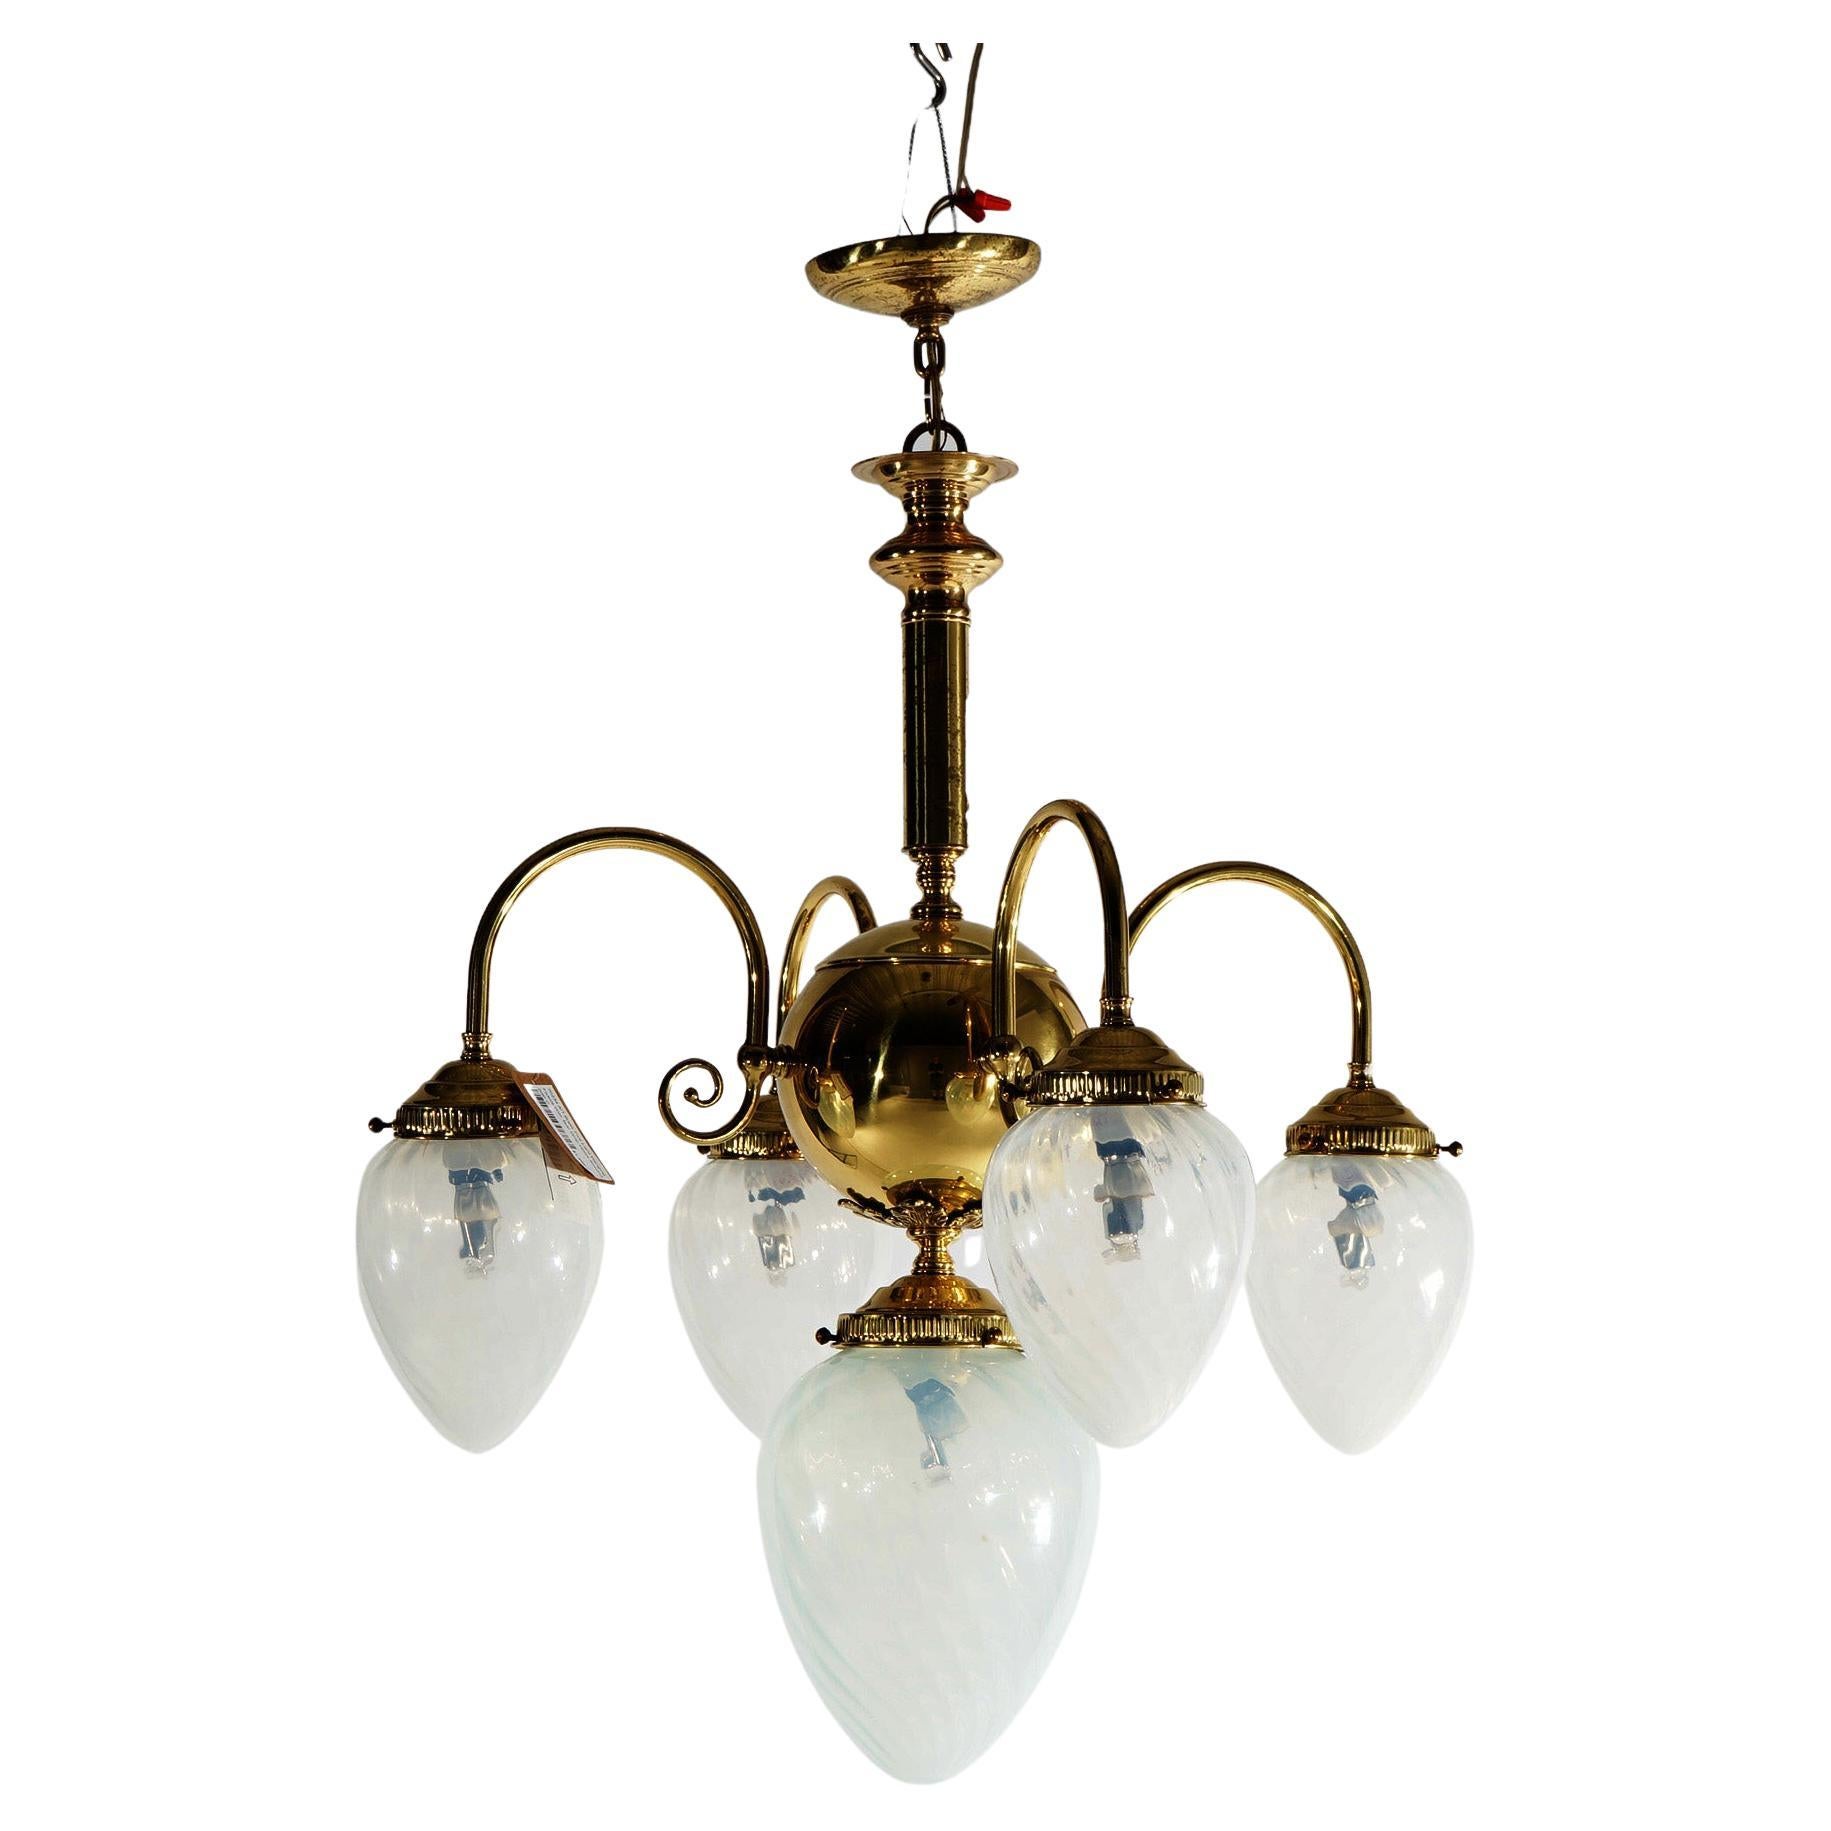 Brass Five-Light Hanging Fixture with Tear Drop Swirl Glass Shades 20th C For Sale